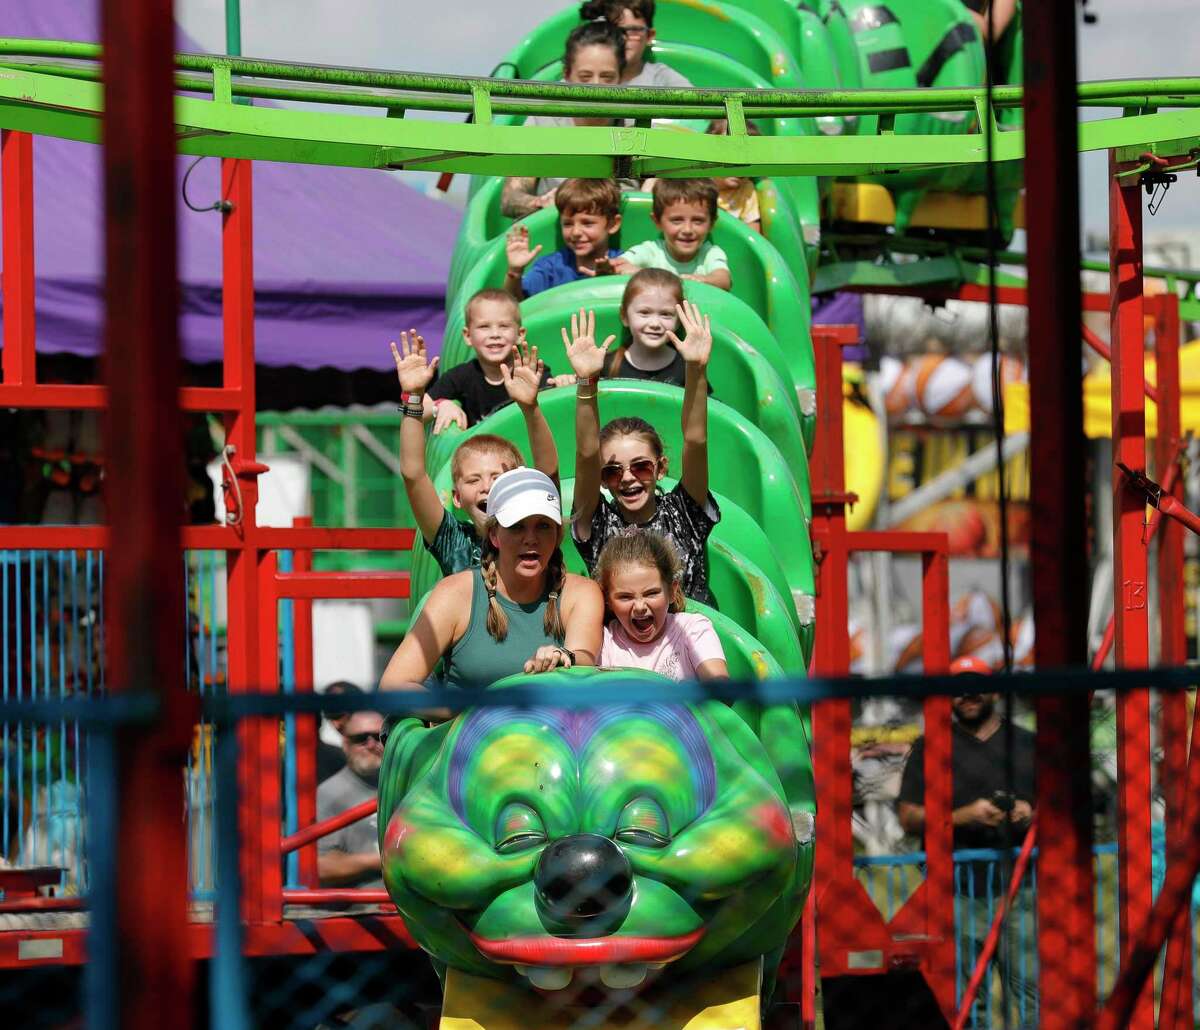 Sarah May, left, scream as she rides the Wacky Worm with her daughter, Eva, during the annual Conroe Cajun Catfish Festival, Saturday, Oct. 9, 2021, in Conroe.